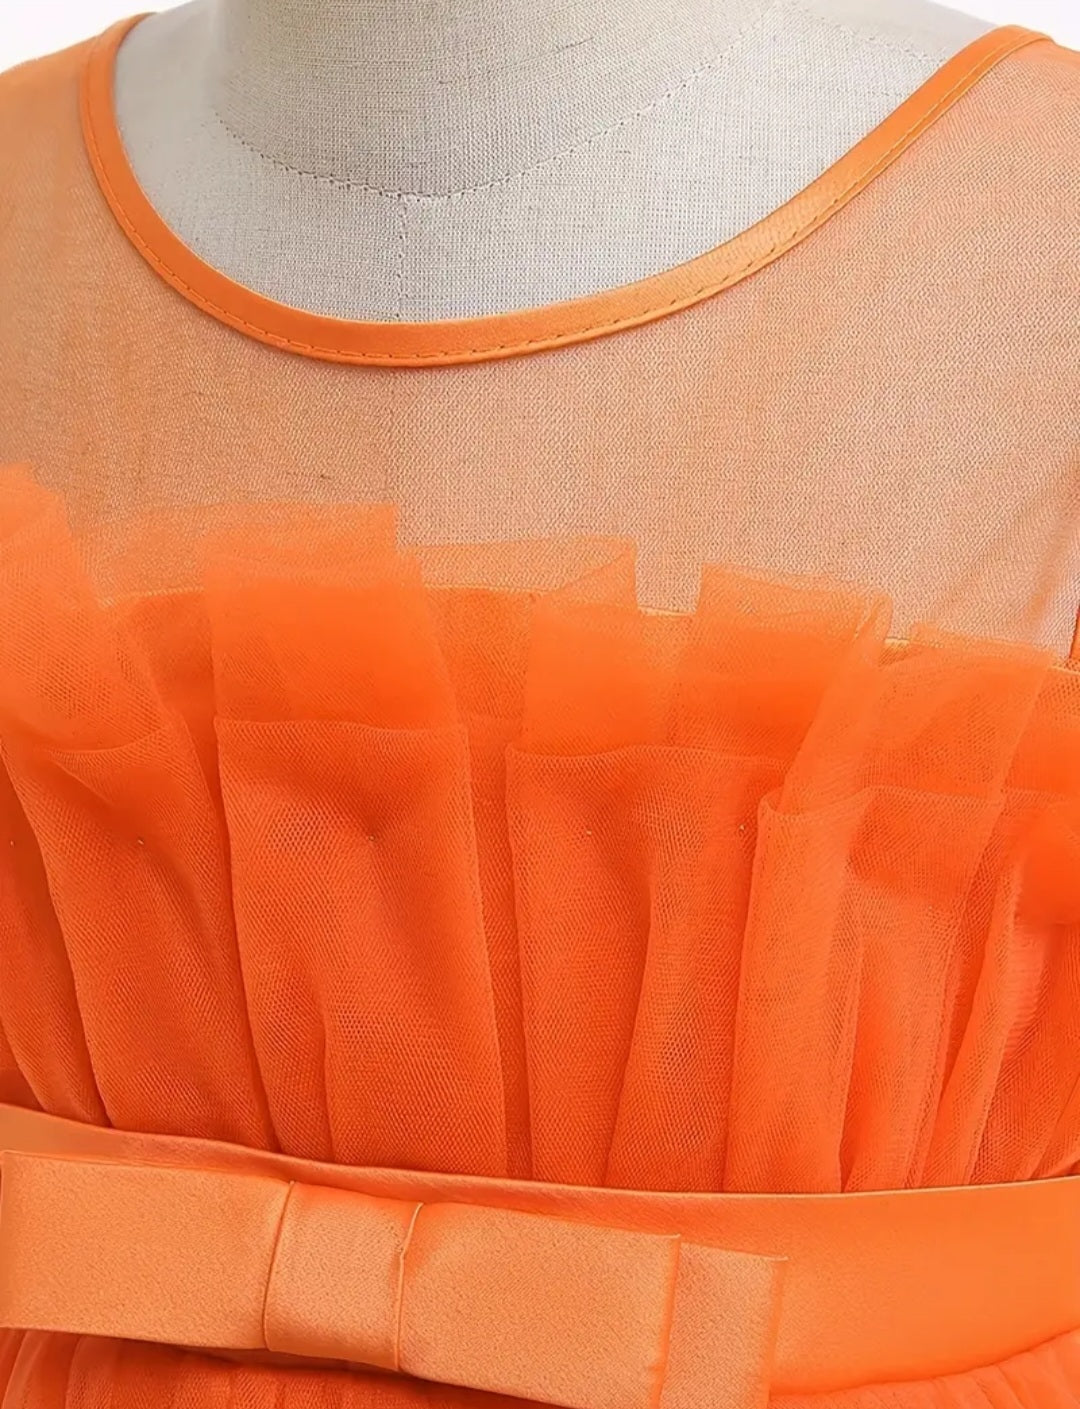 Orange Ruffle Special Occasions Dress 